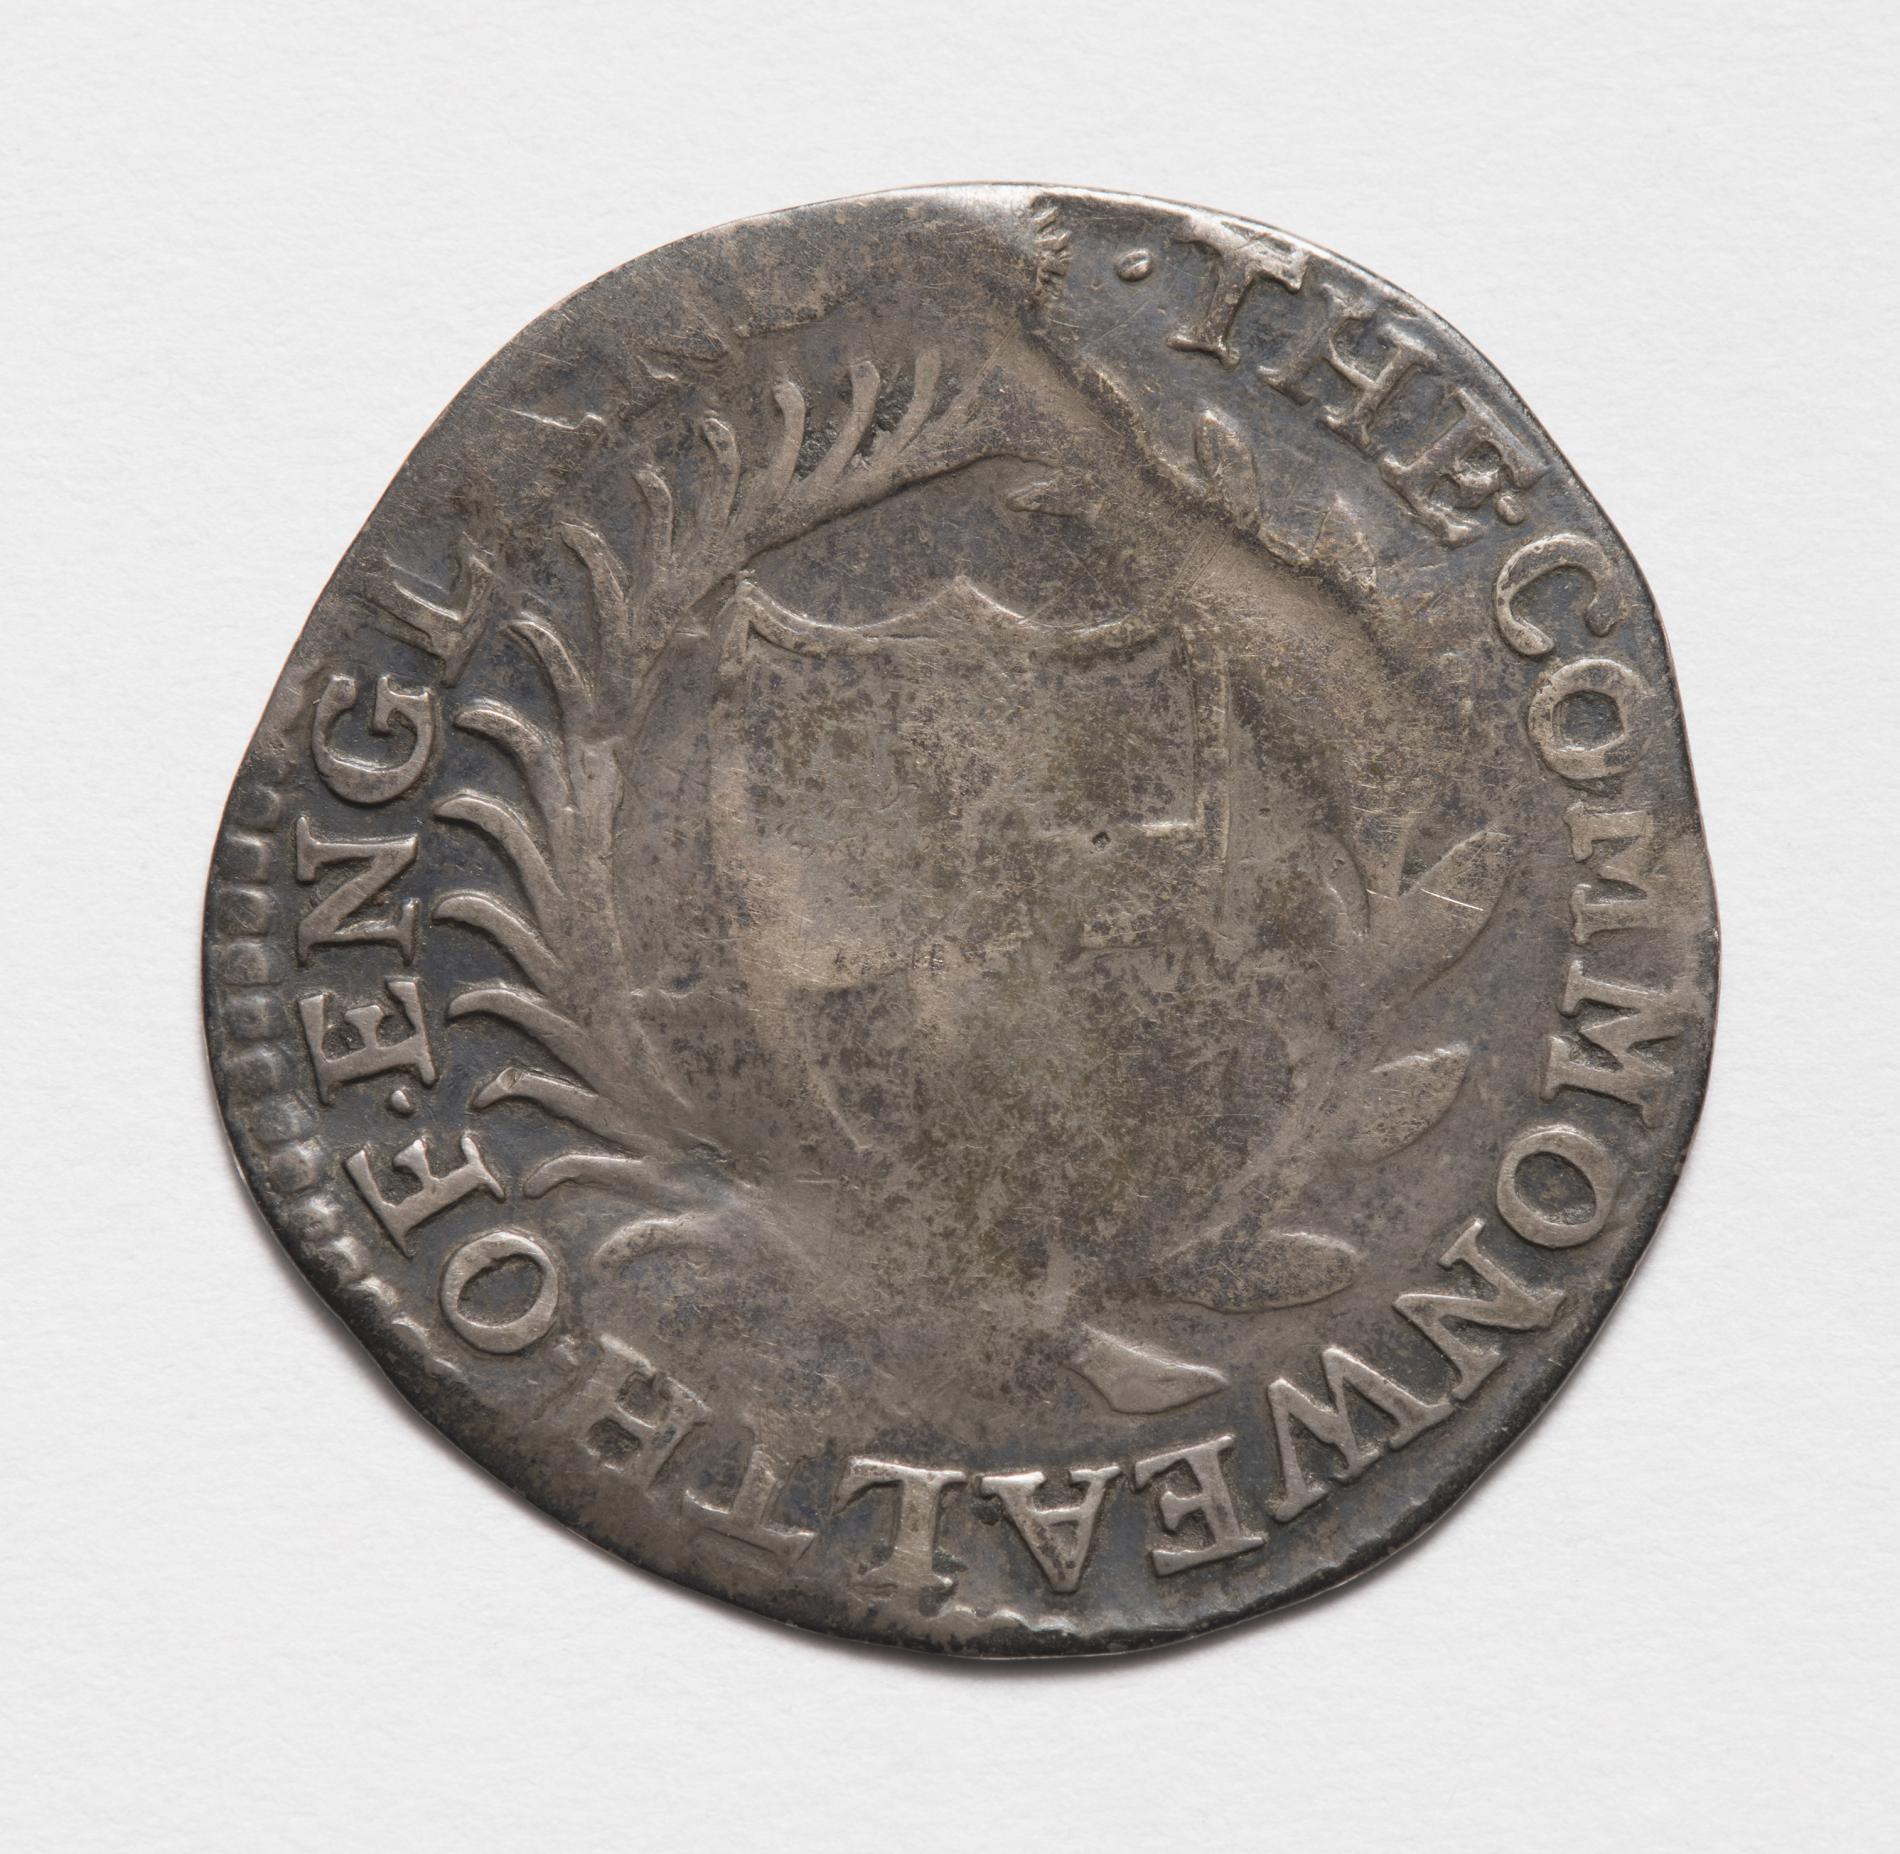 Photograph of a worn commonwealth sixpence